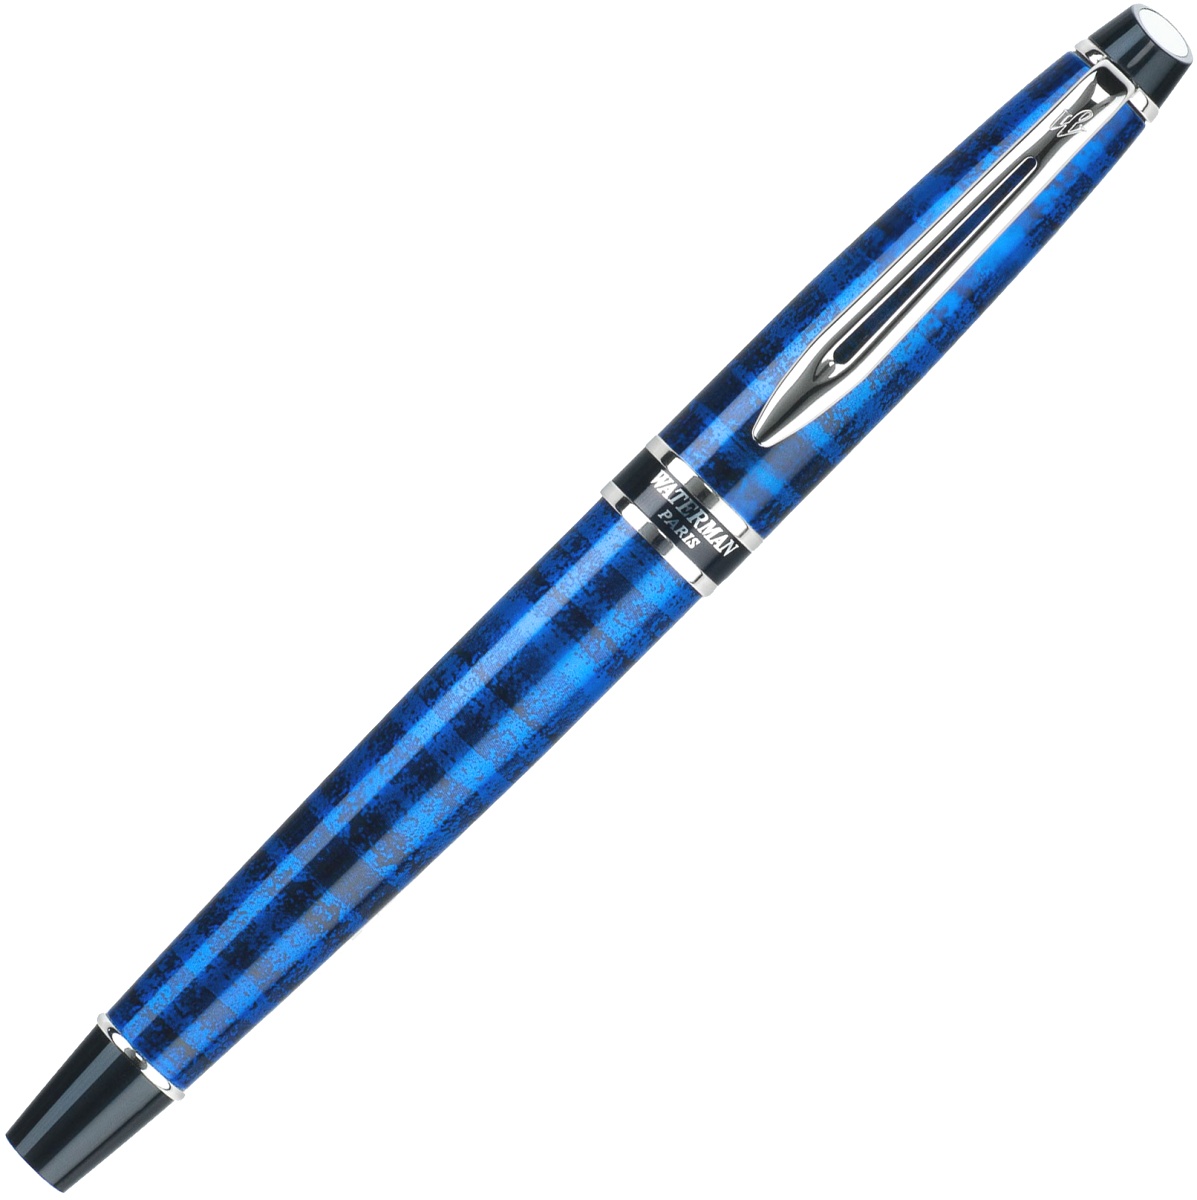  Ручка-роллер Waterman Expert 2, Sublimated Blue CT, фото 2